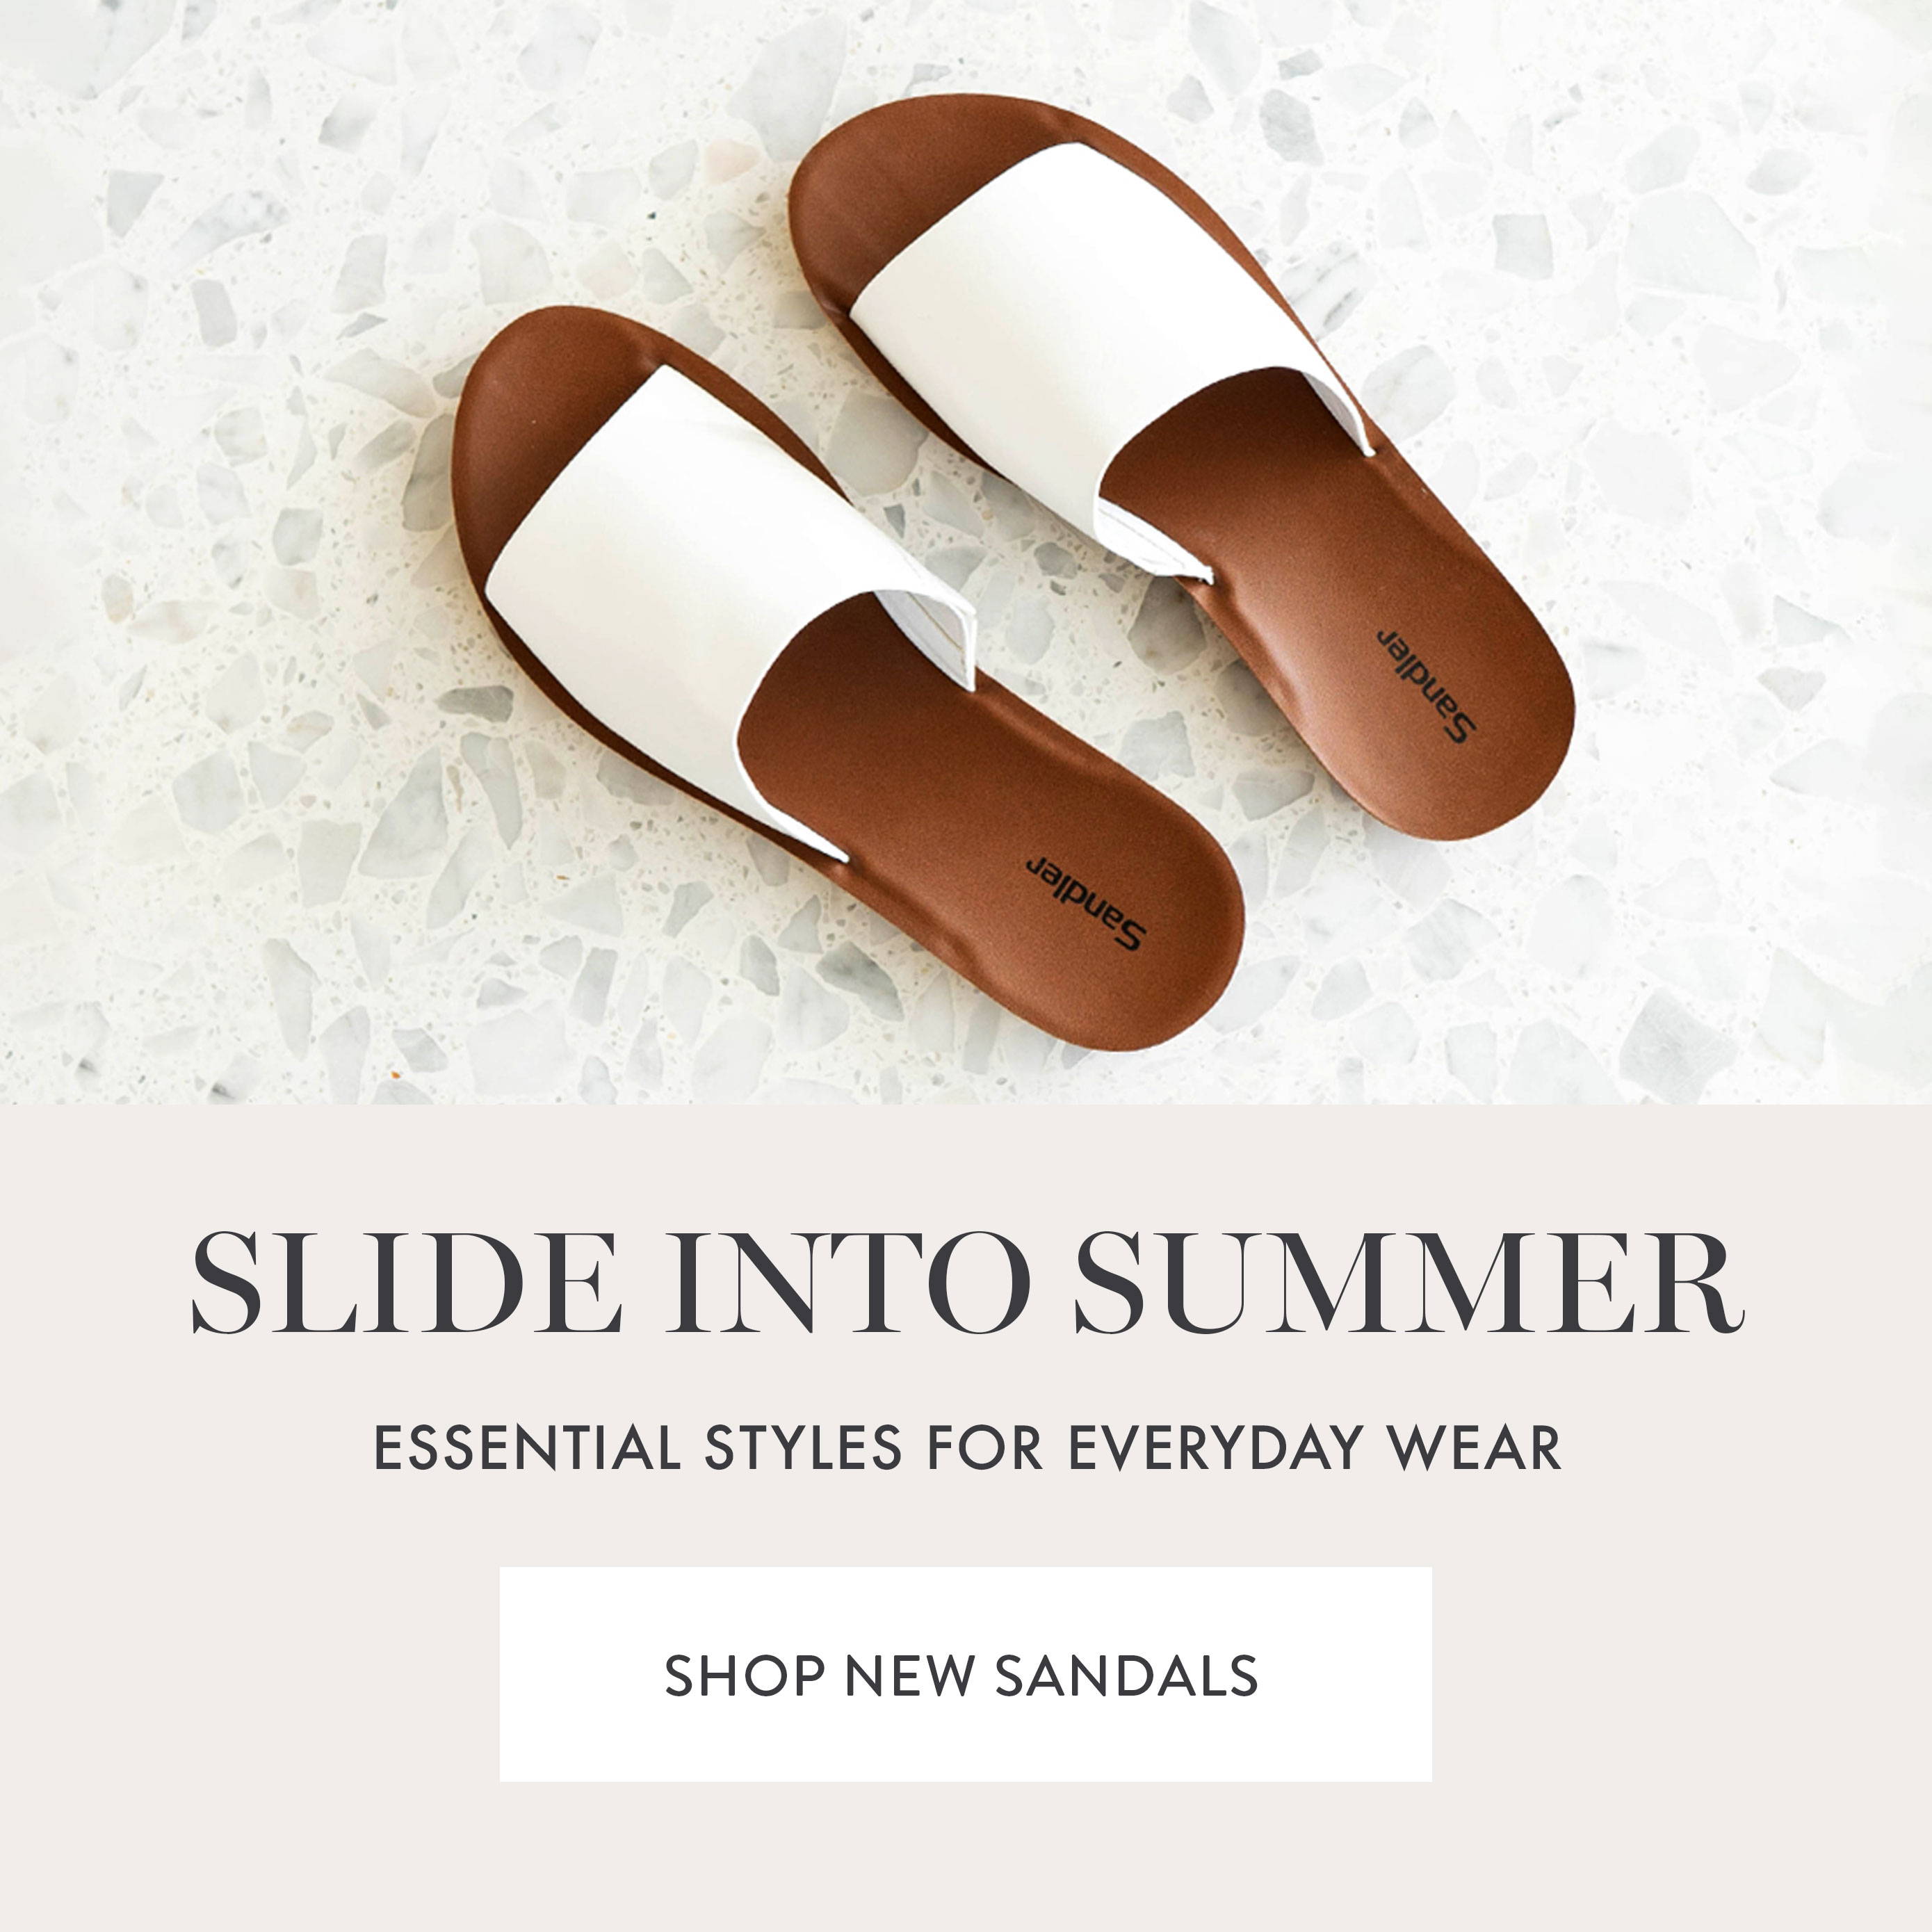 shoes and sandals online shopping